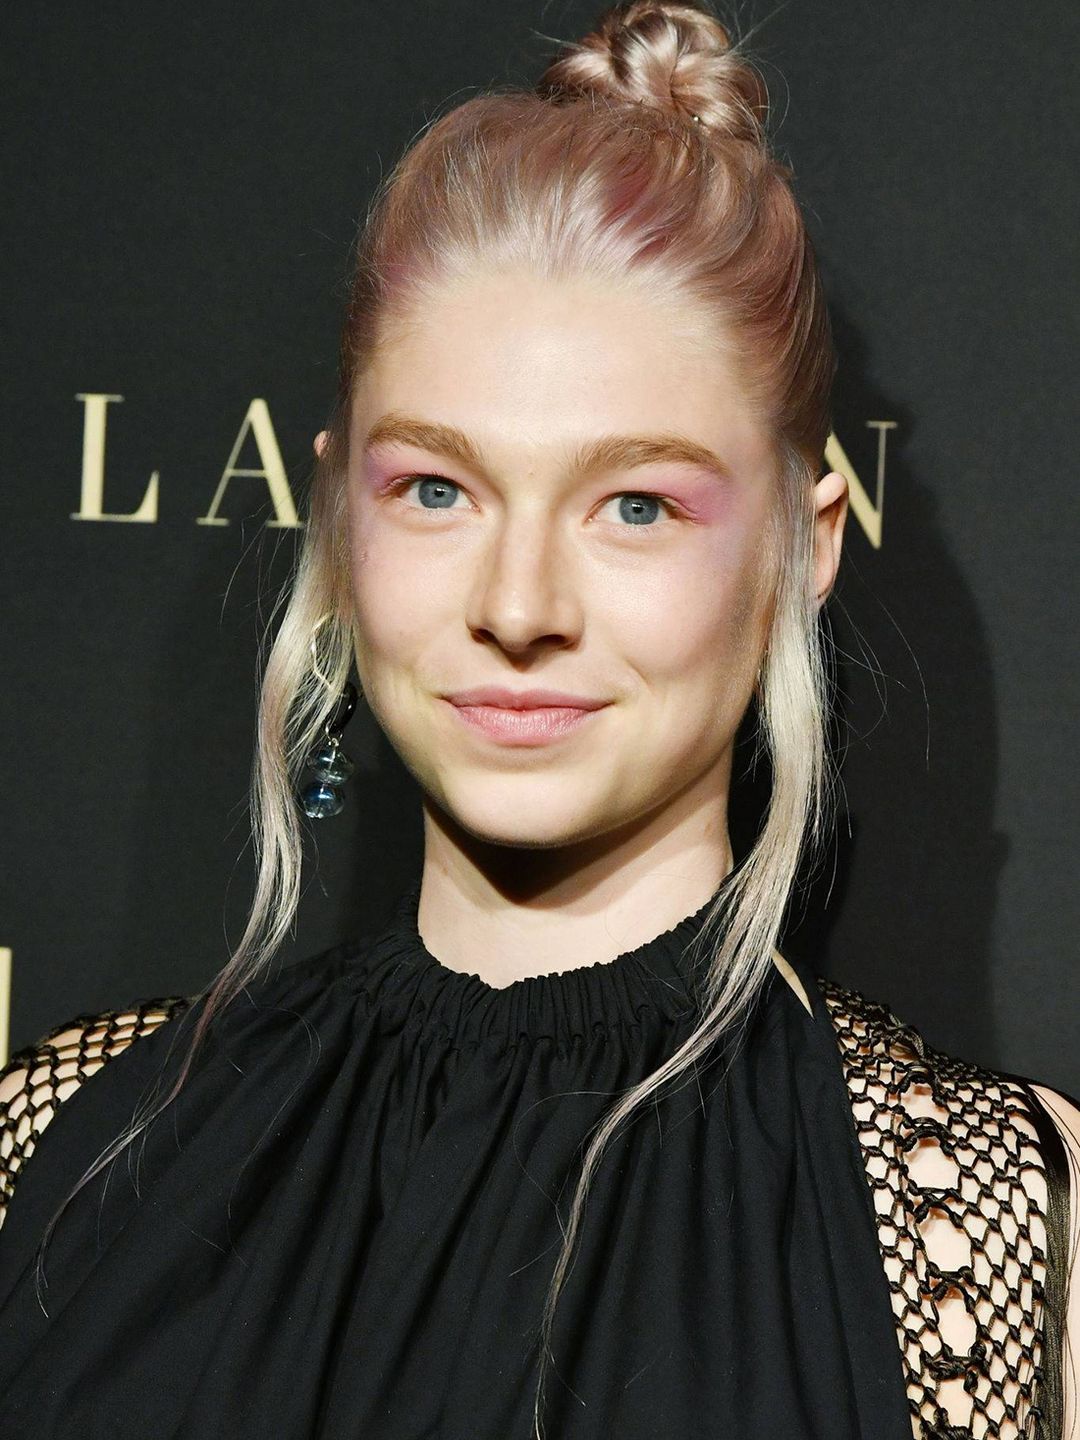 Hunter Schafer where is she now